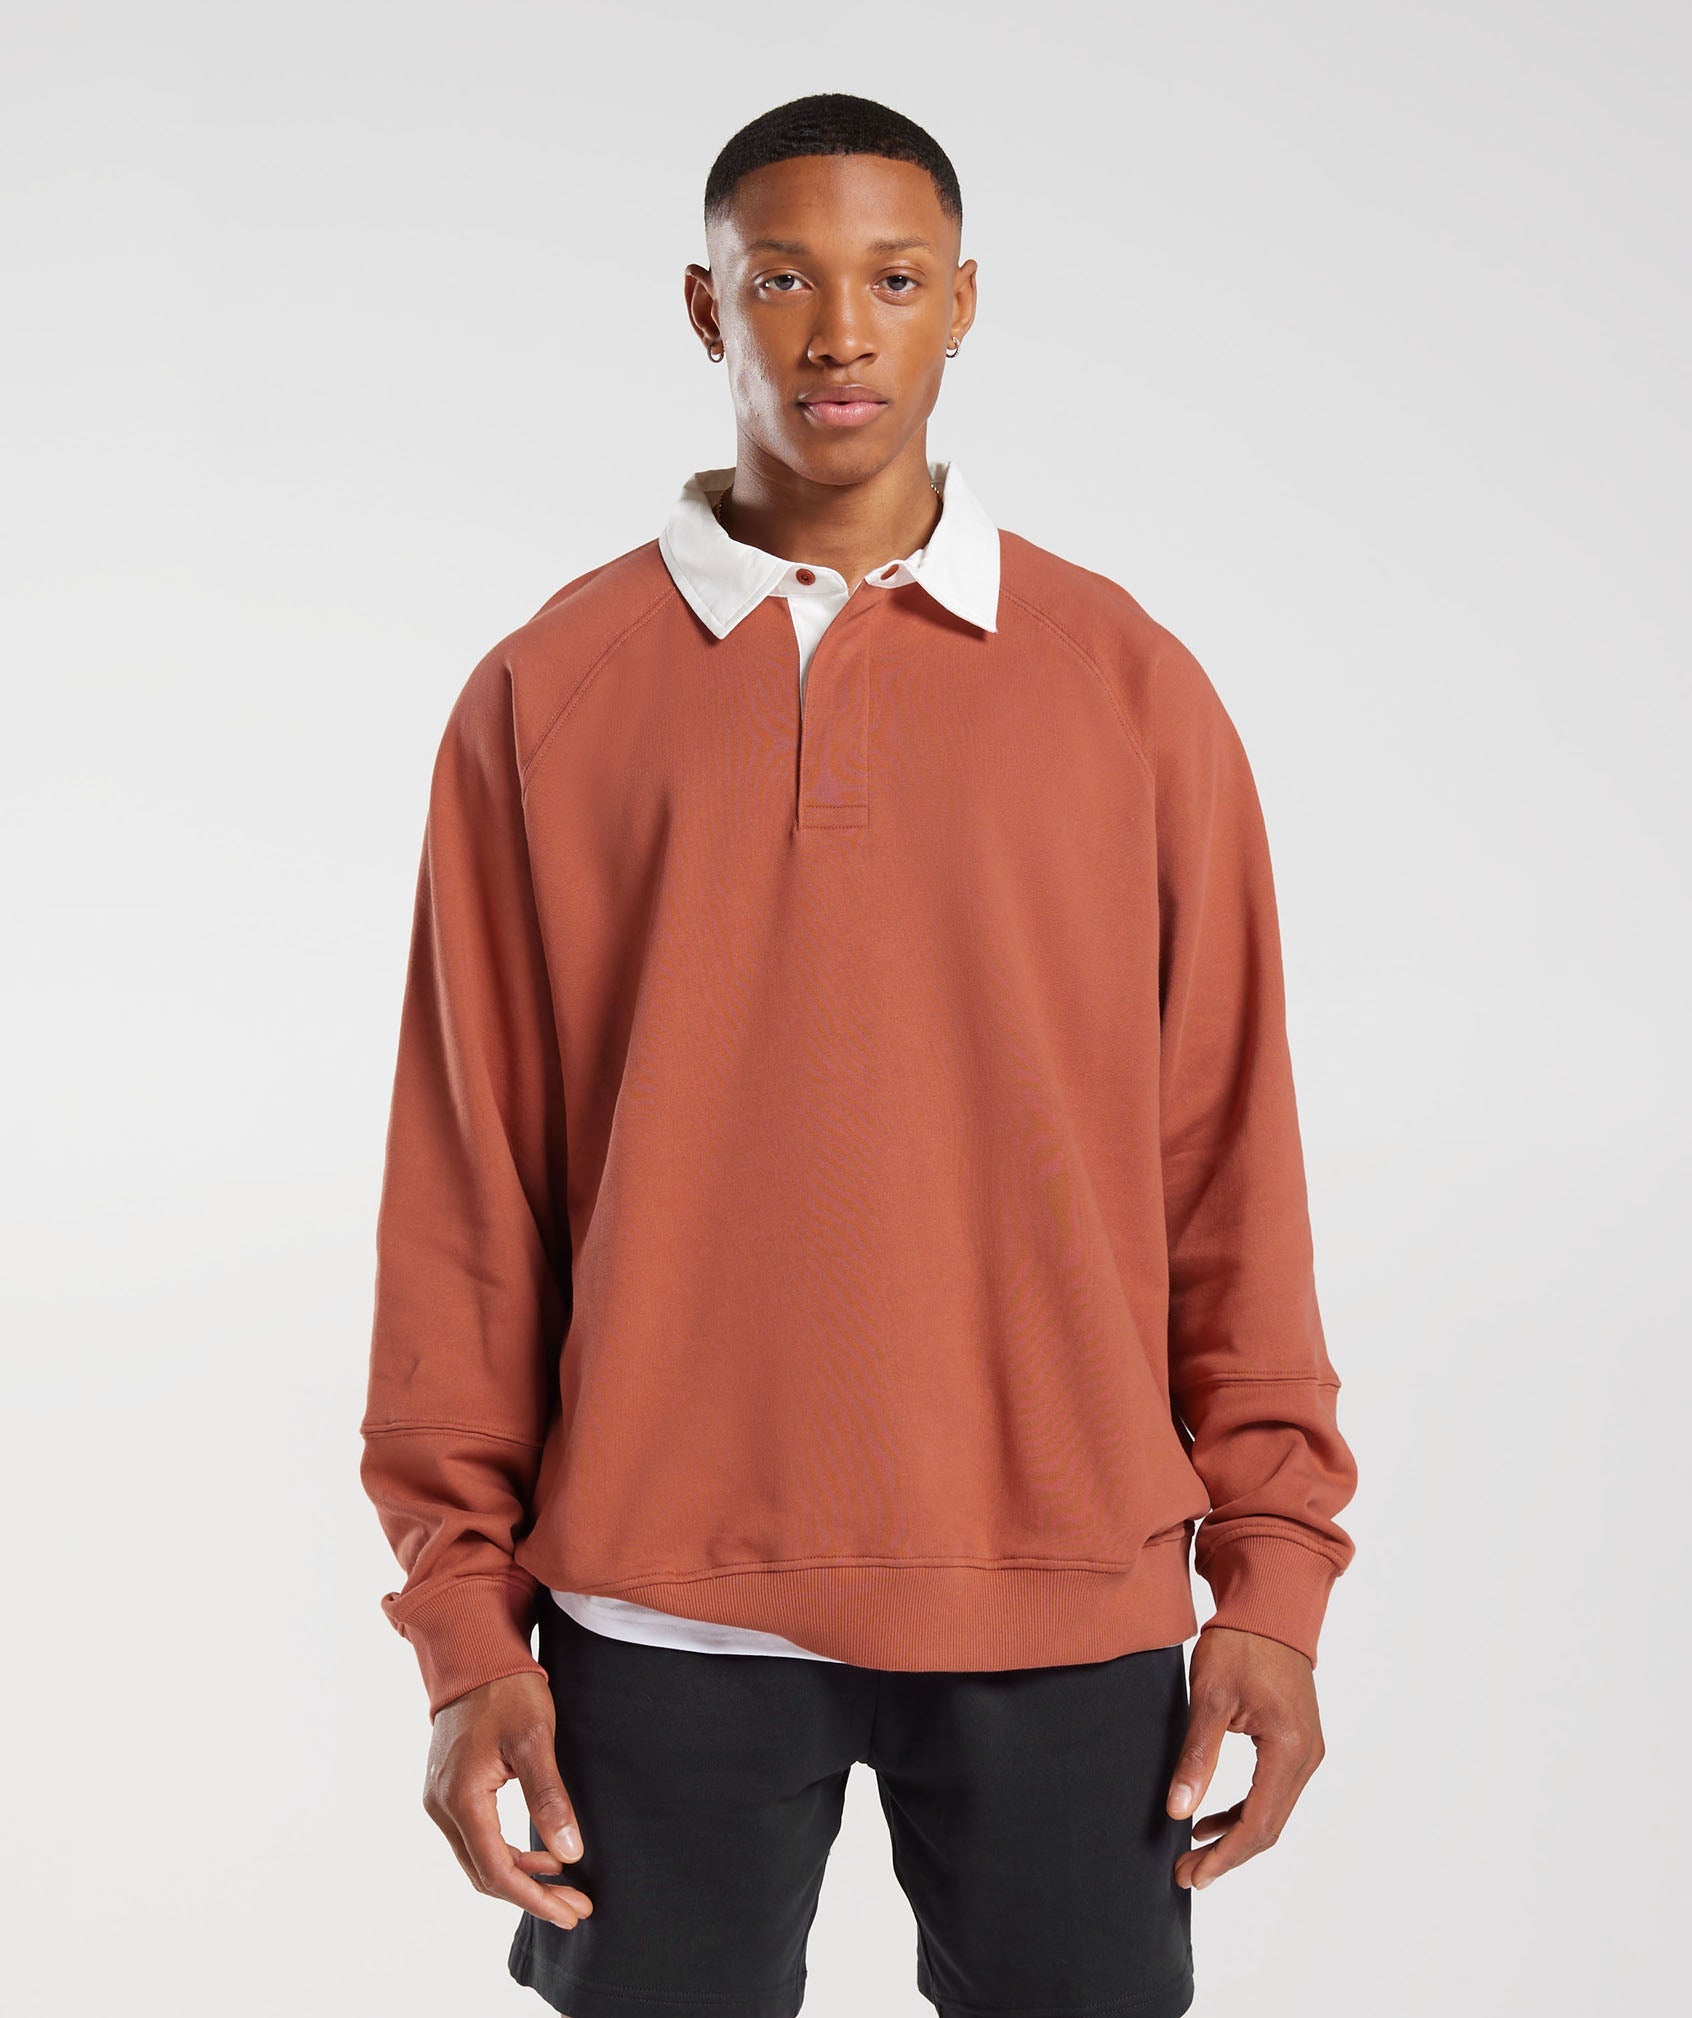 Rest Day Essentials Sweat Polo in Persimmon Red - view 1